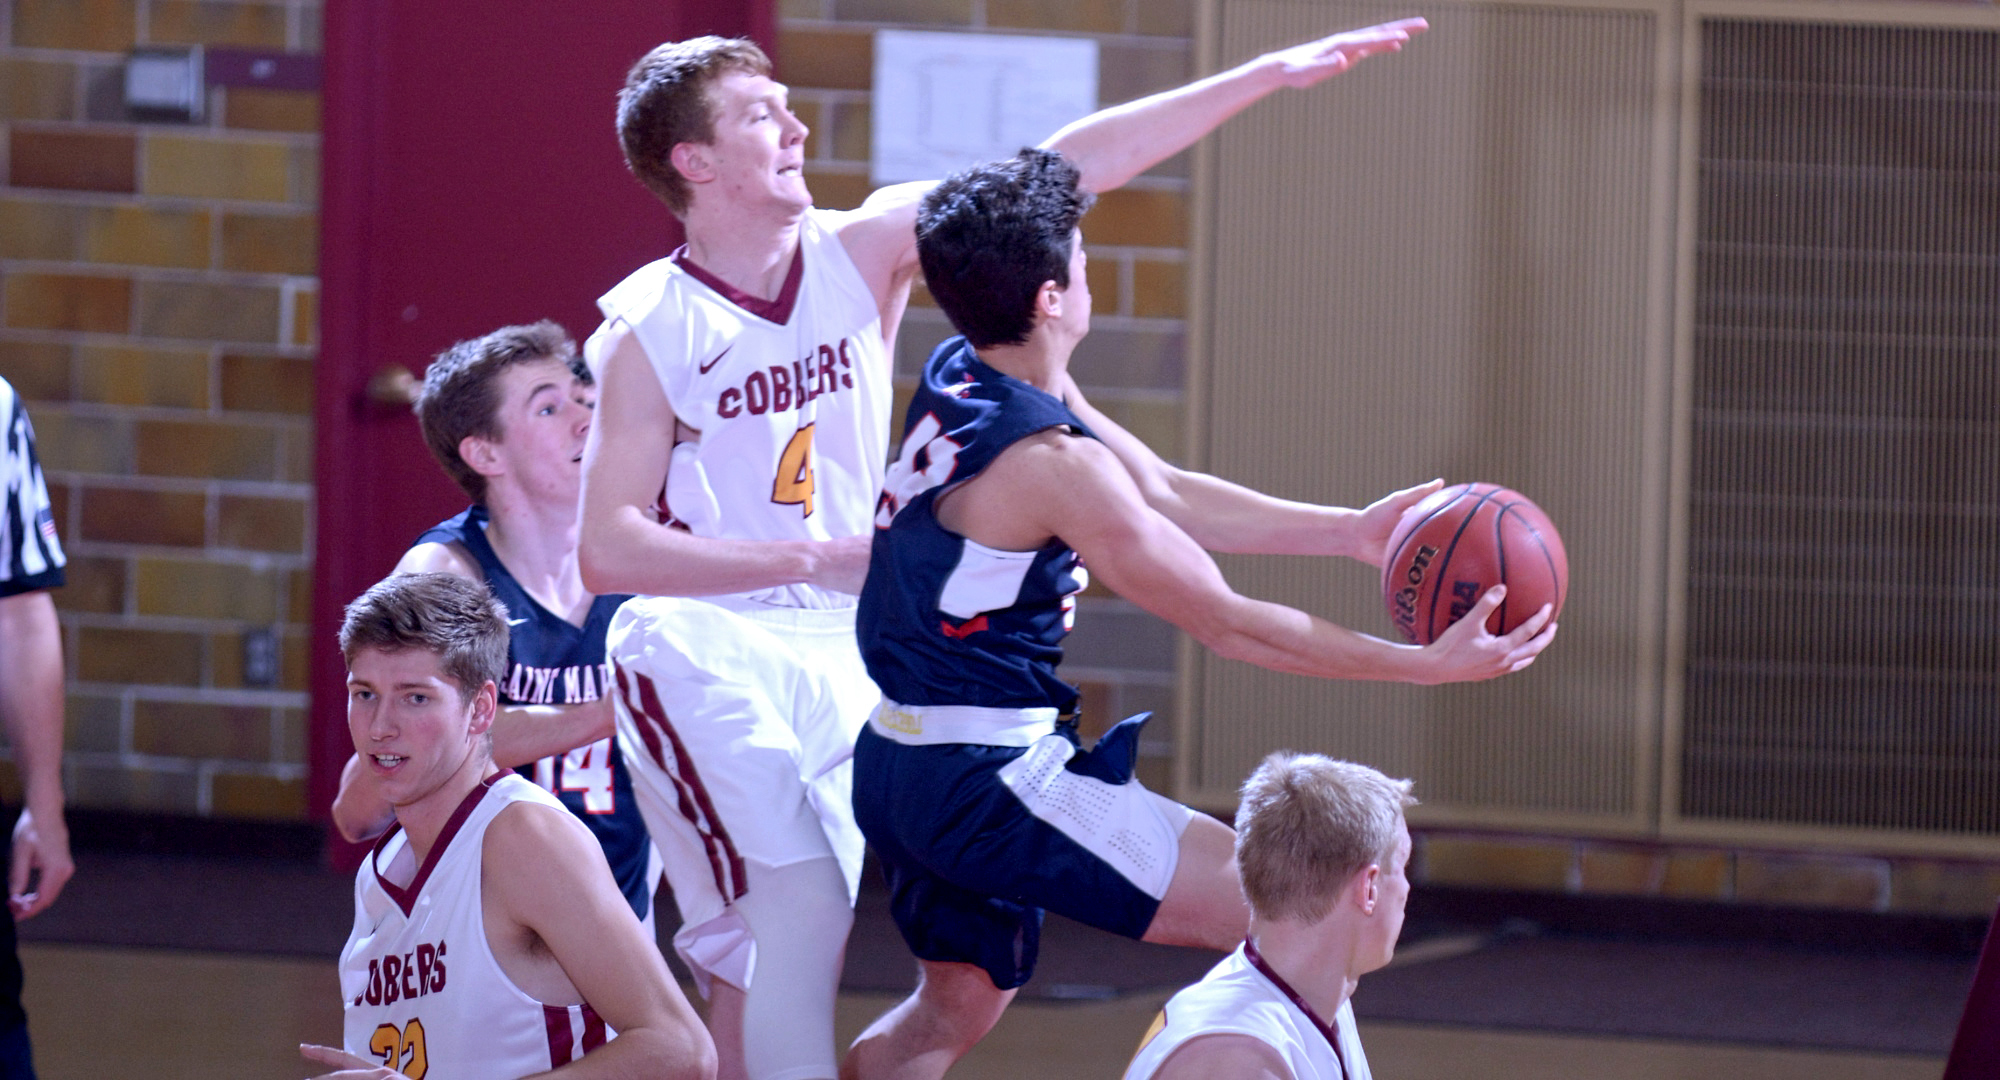 Collin Larson (#4) led Concordia with 11 points and four rebounds in the Cobbers' game at Carleton.